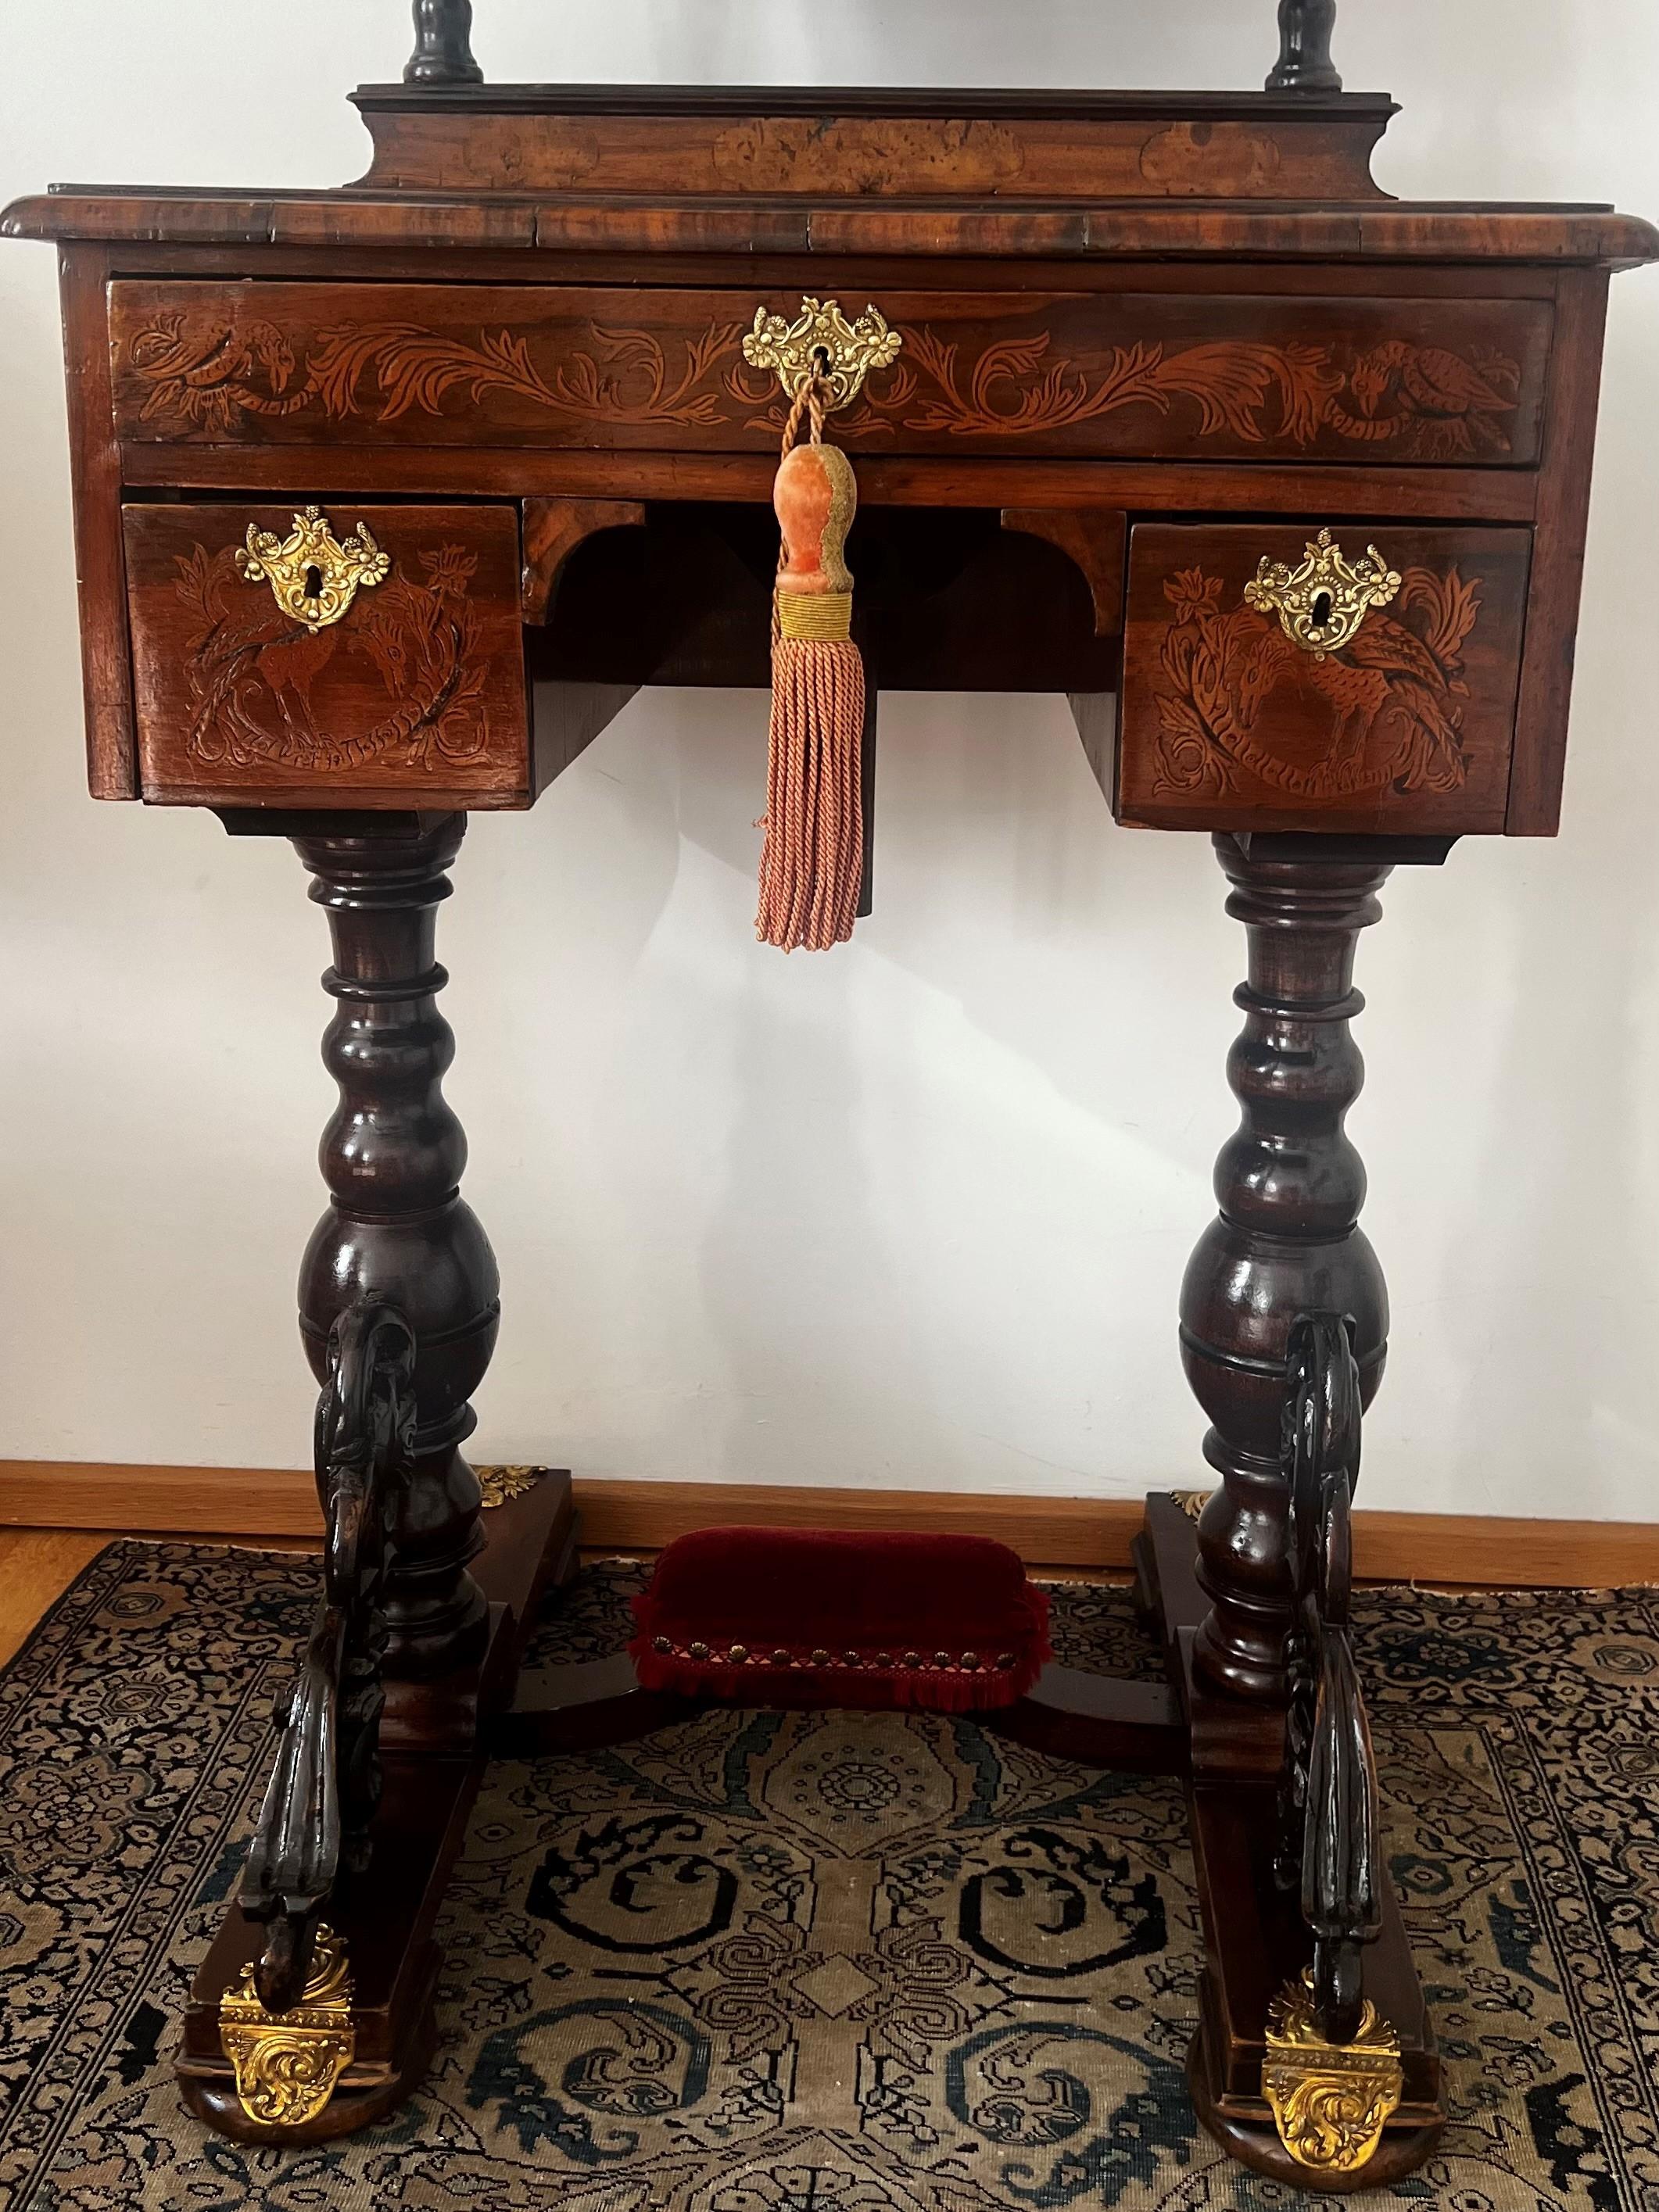 “MIRROR, MIRROR ON THE WALL, WHO’S THE FAIREST OF THEM ALL”?  

This ladies’ antique dressing table is elegant and playful. It decorated with gold gilded ornaments on the legs, mirror and on the table itself. The veneer inlays are absolutely